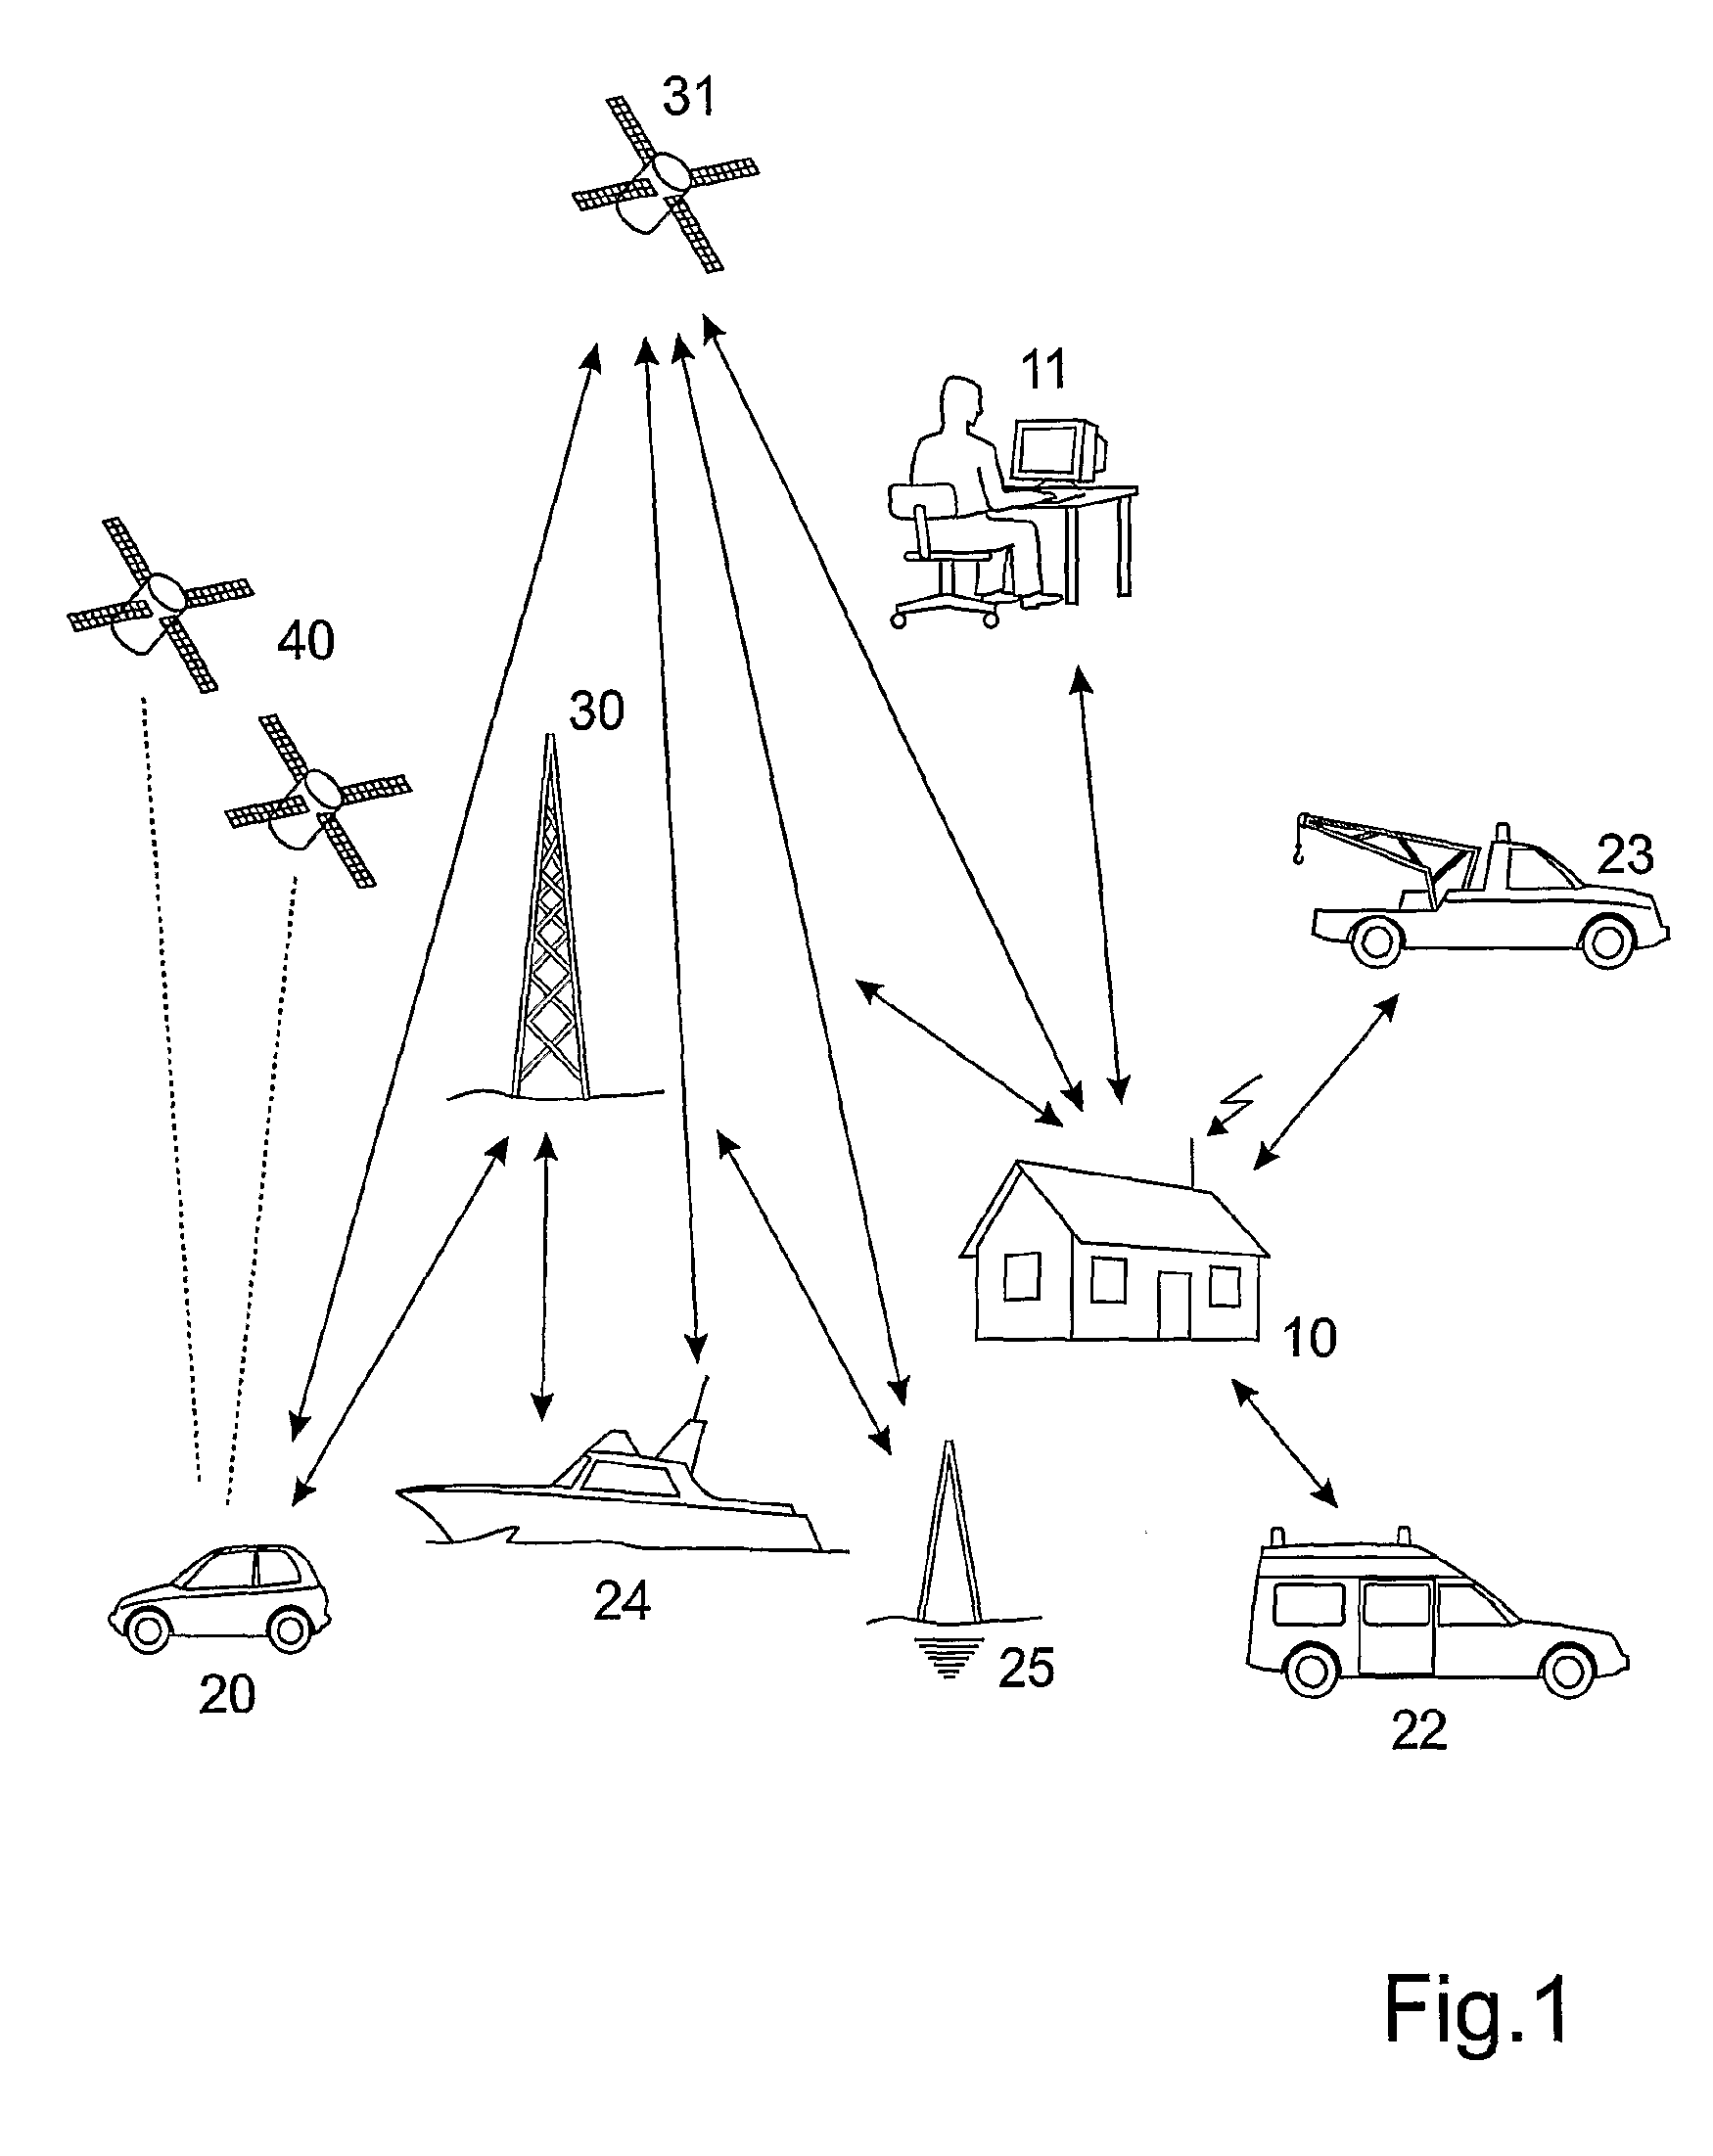 Method for operating a communication system and objects for such a system